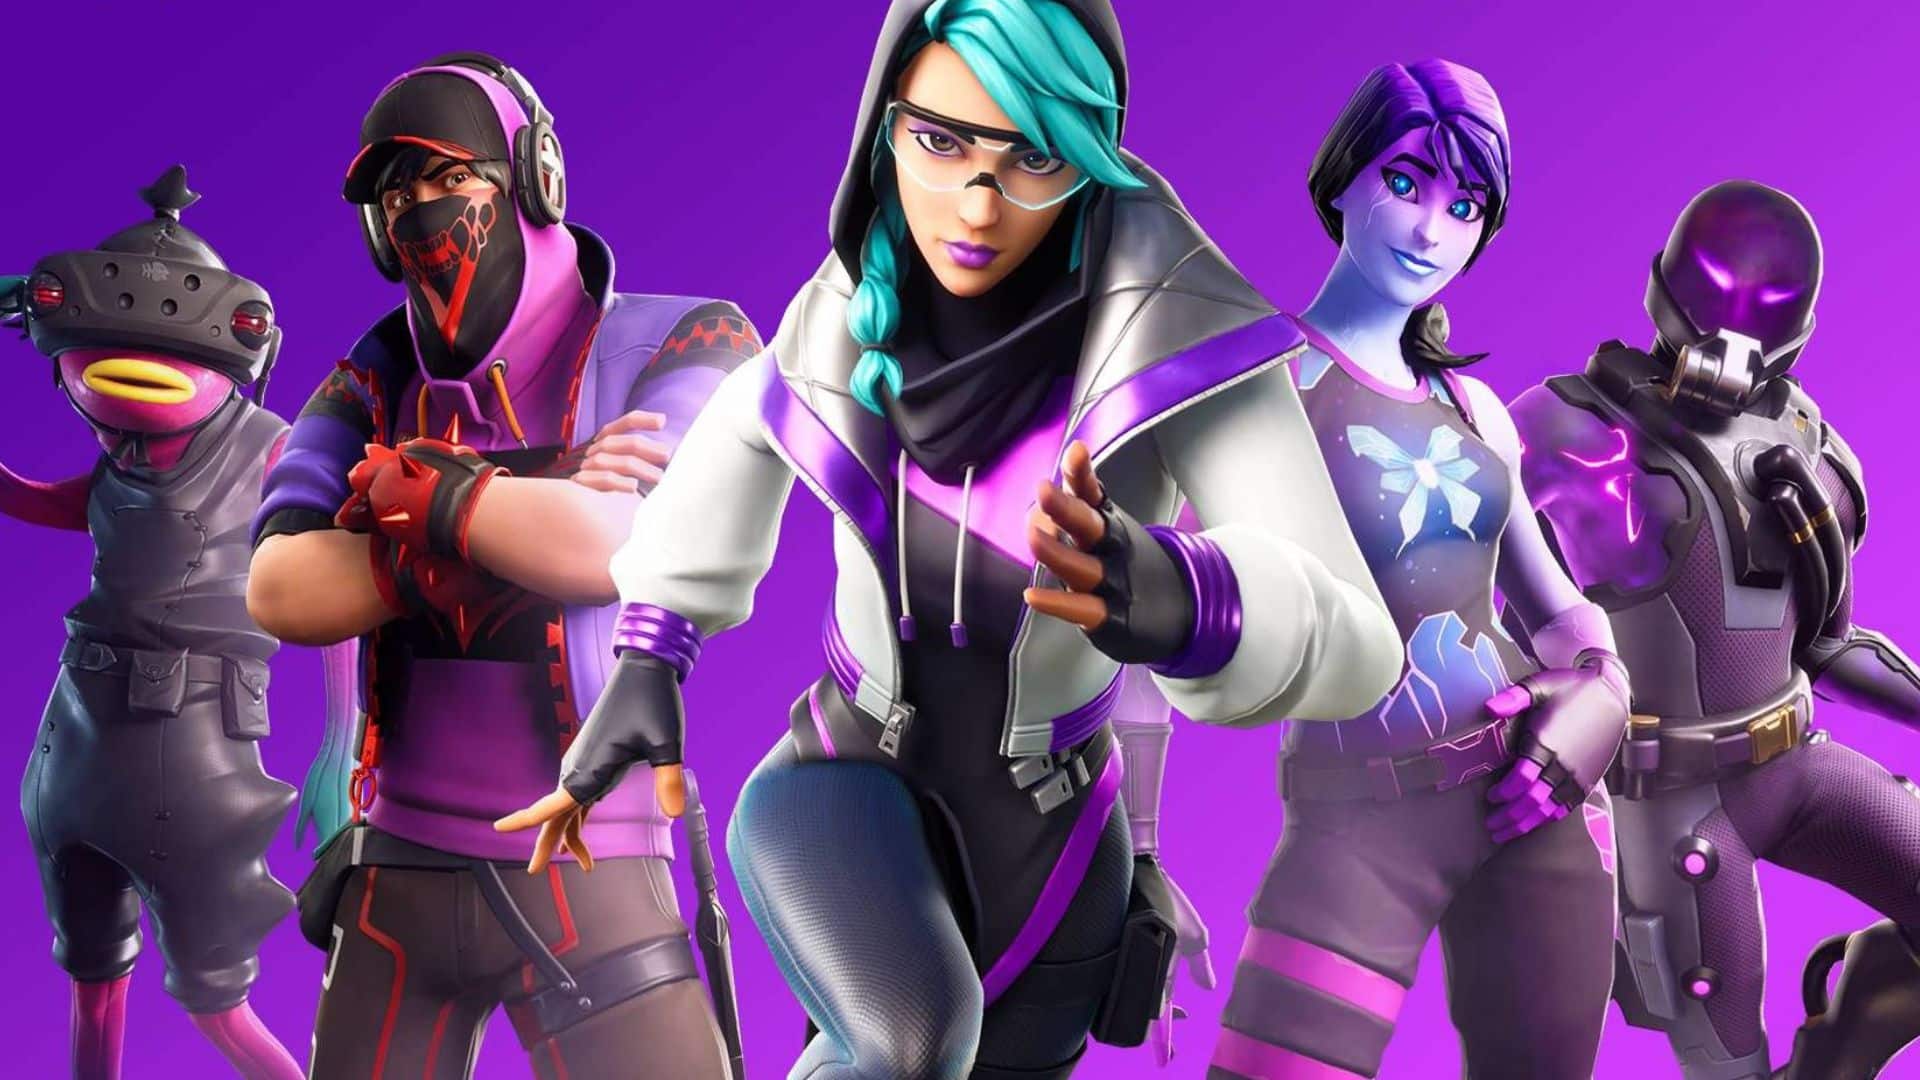 Fortnite characters posing behind a purple background